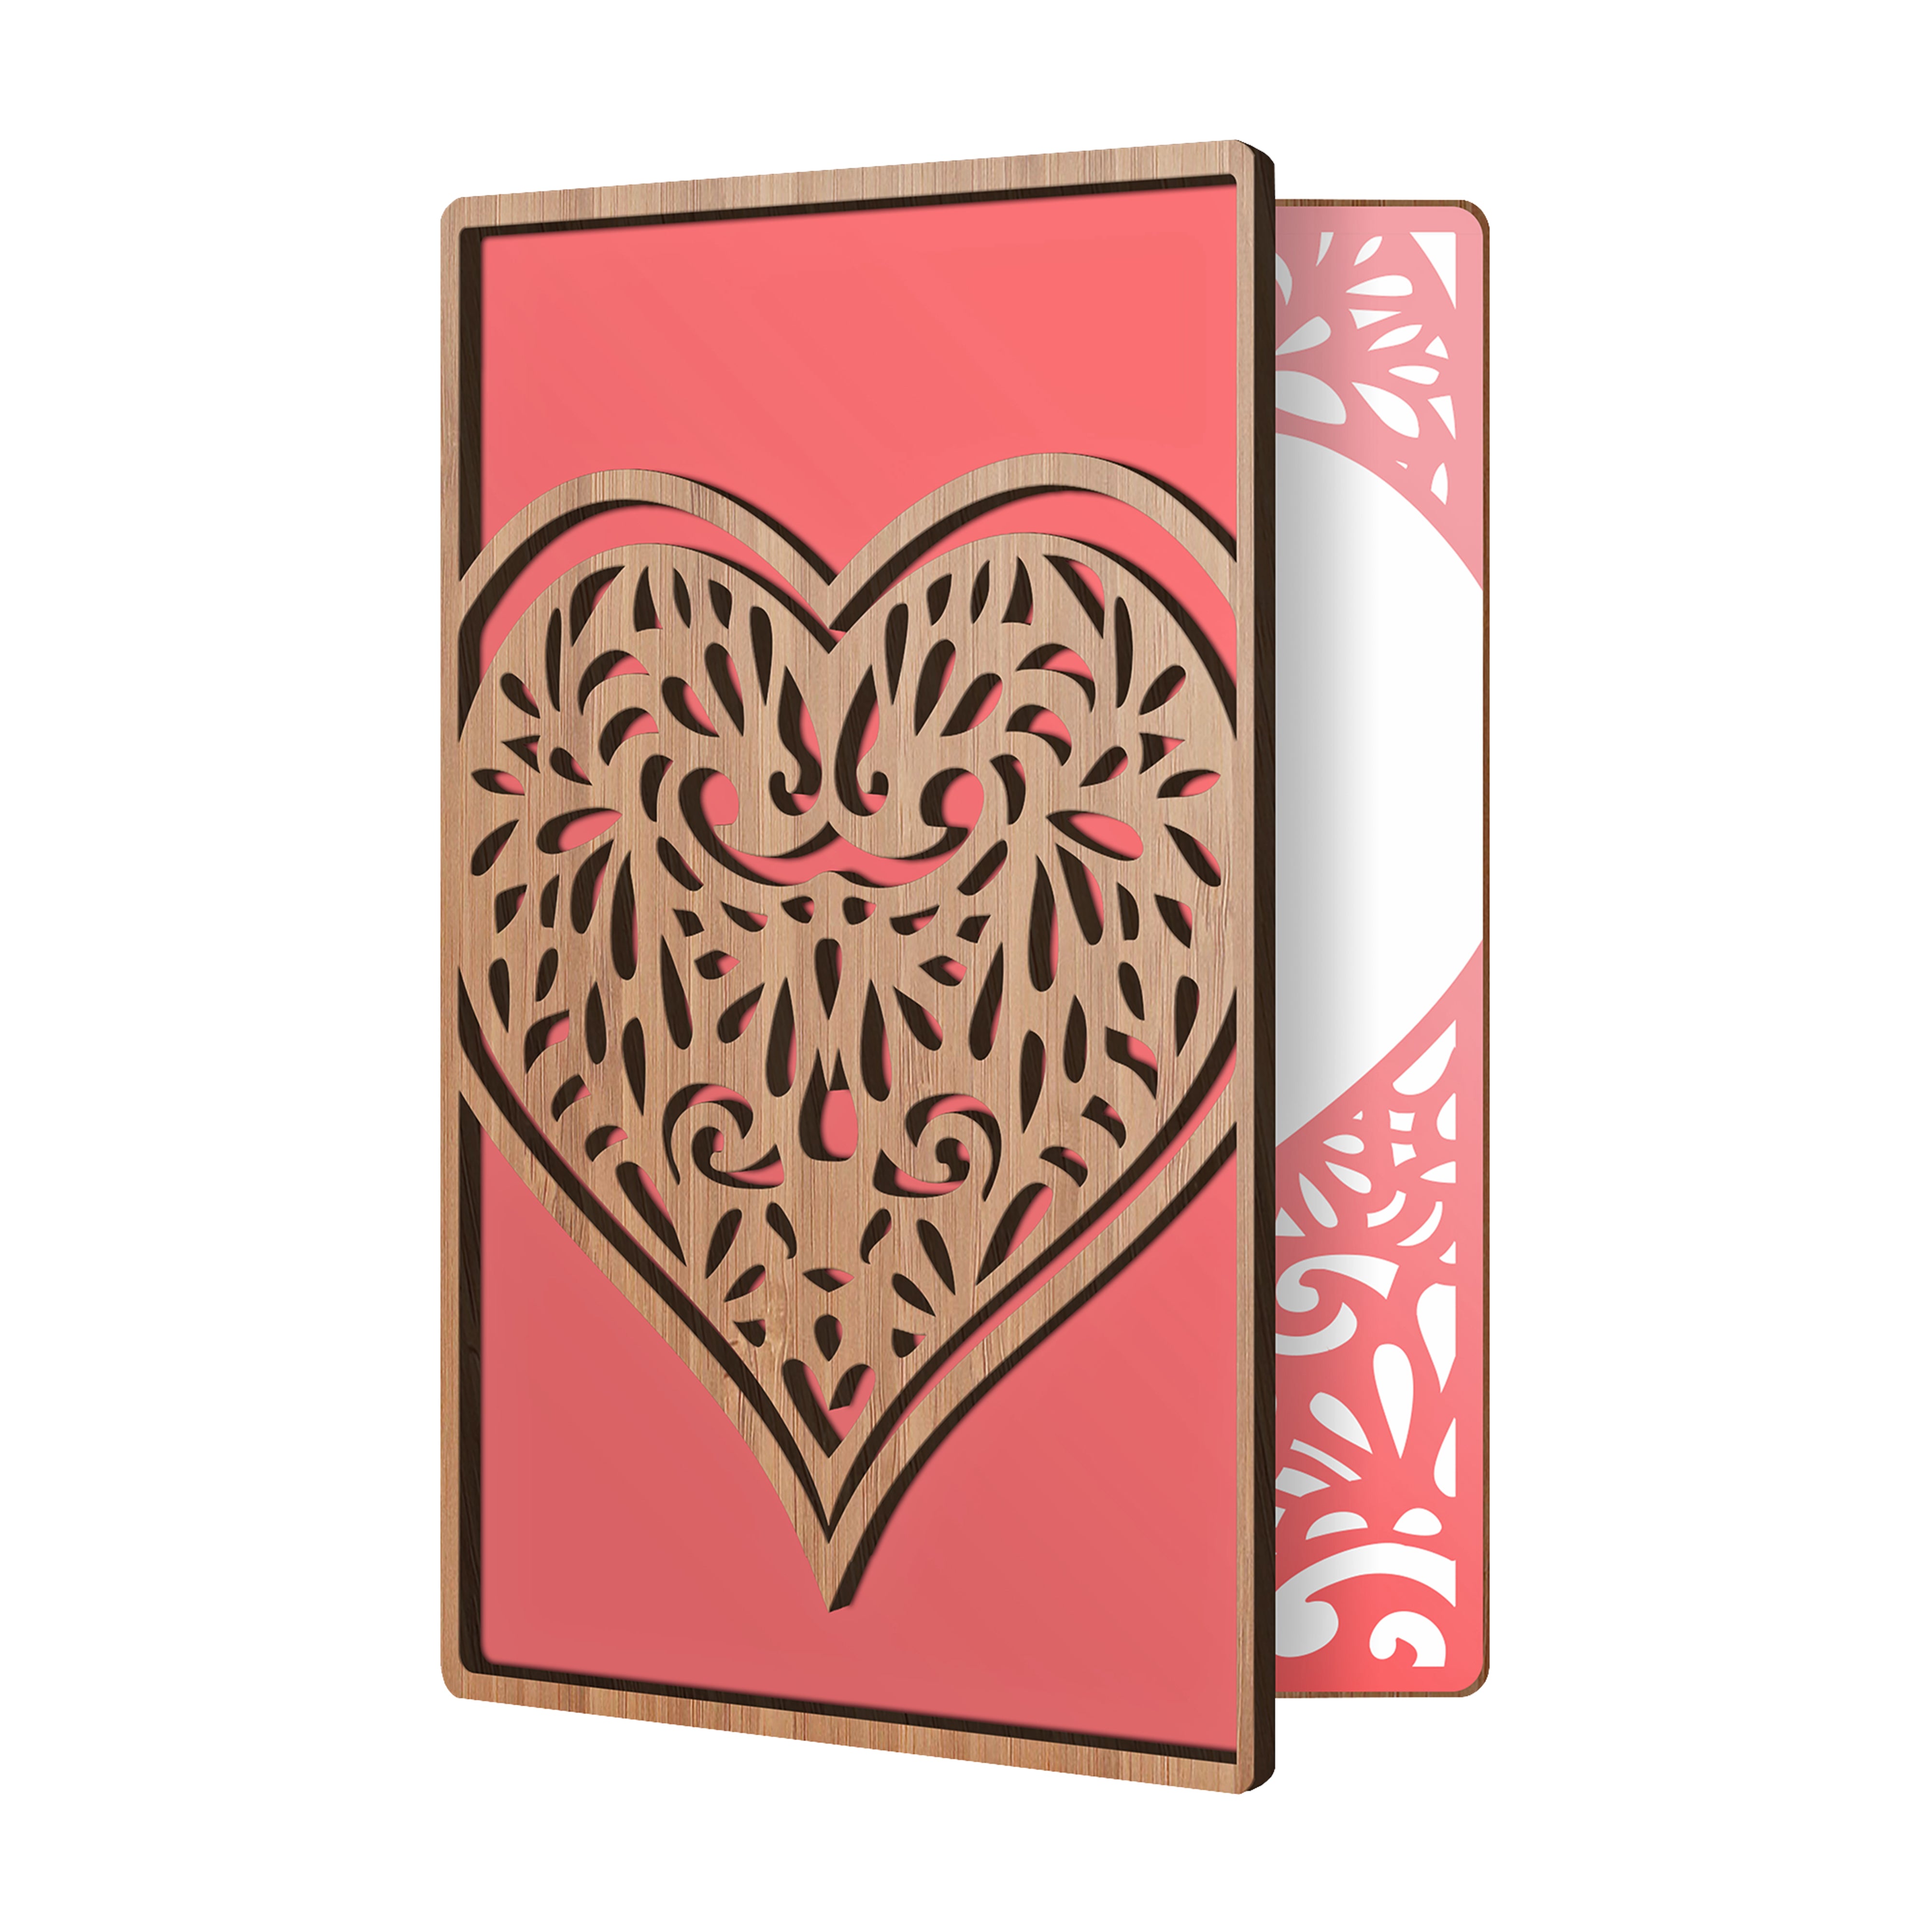 HeartSpace | Valentines Day Cards | Handmade Sustainable Bamboo Love Cards | Anniversary Cards for Wife, Husband, Girlfriend | Wooden Memorable & Unique Valentines Gifts for Her, Him | Intricate Heart